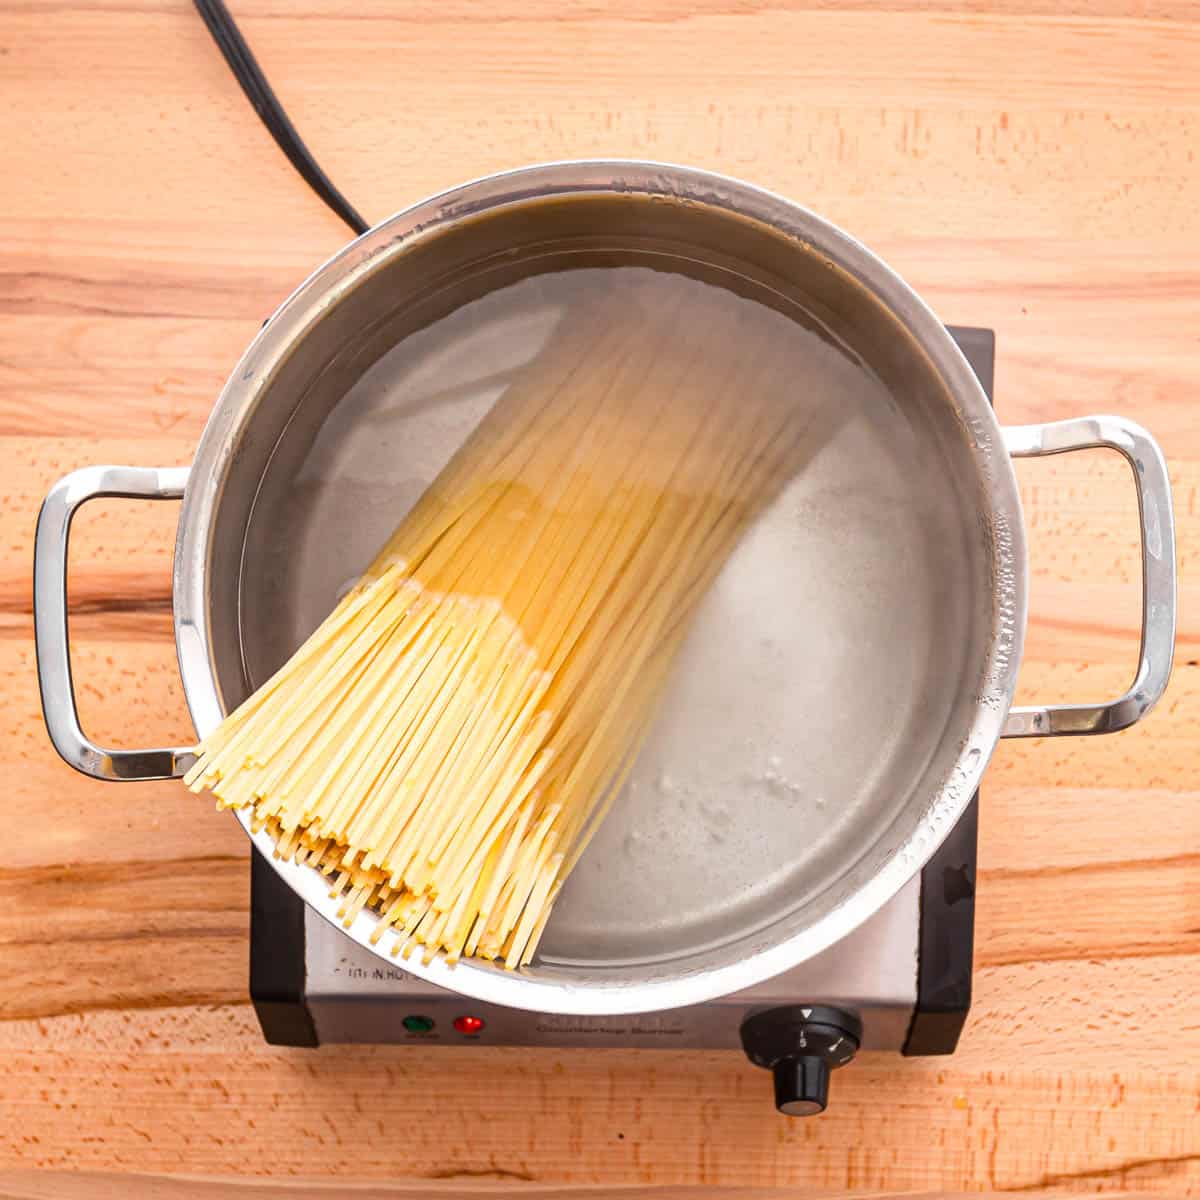 Bring a gallon of water to a boil in a large pot